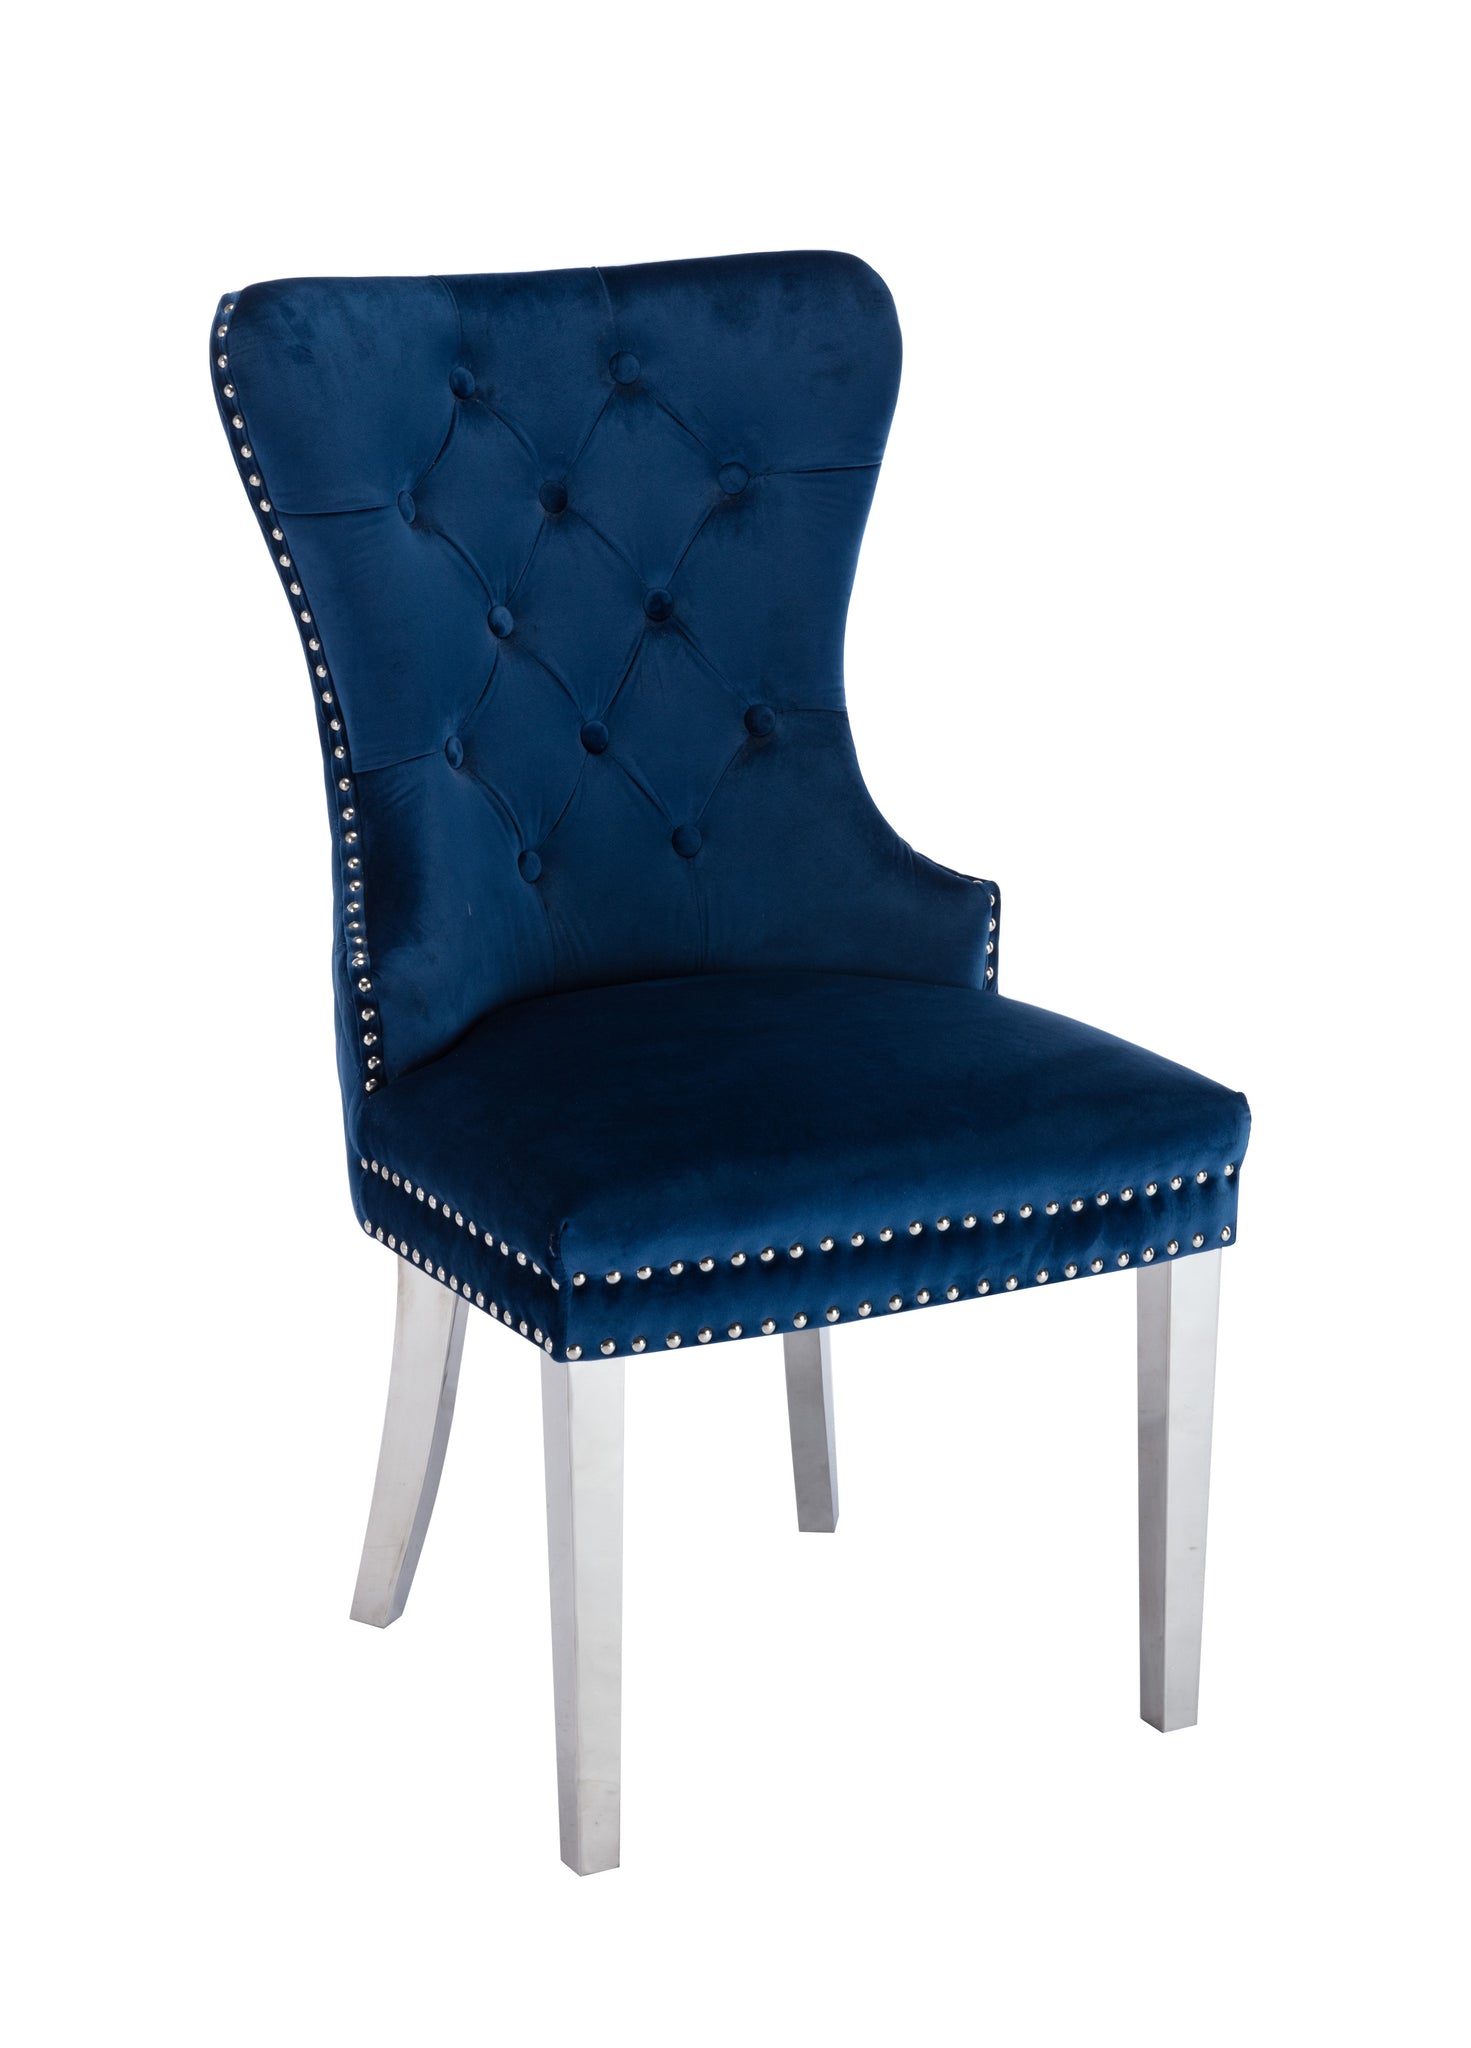 Simba Stainless Steel 2 Piece Chair Finish with Velvet blue-dining room-contemporary-modern-accent